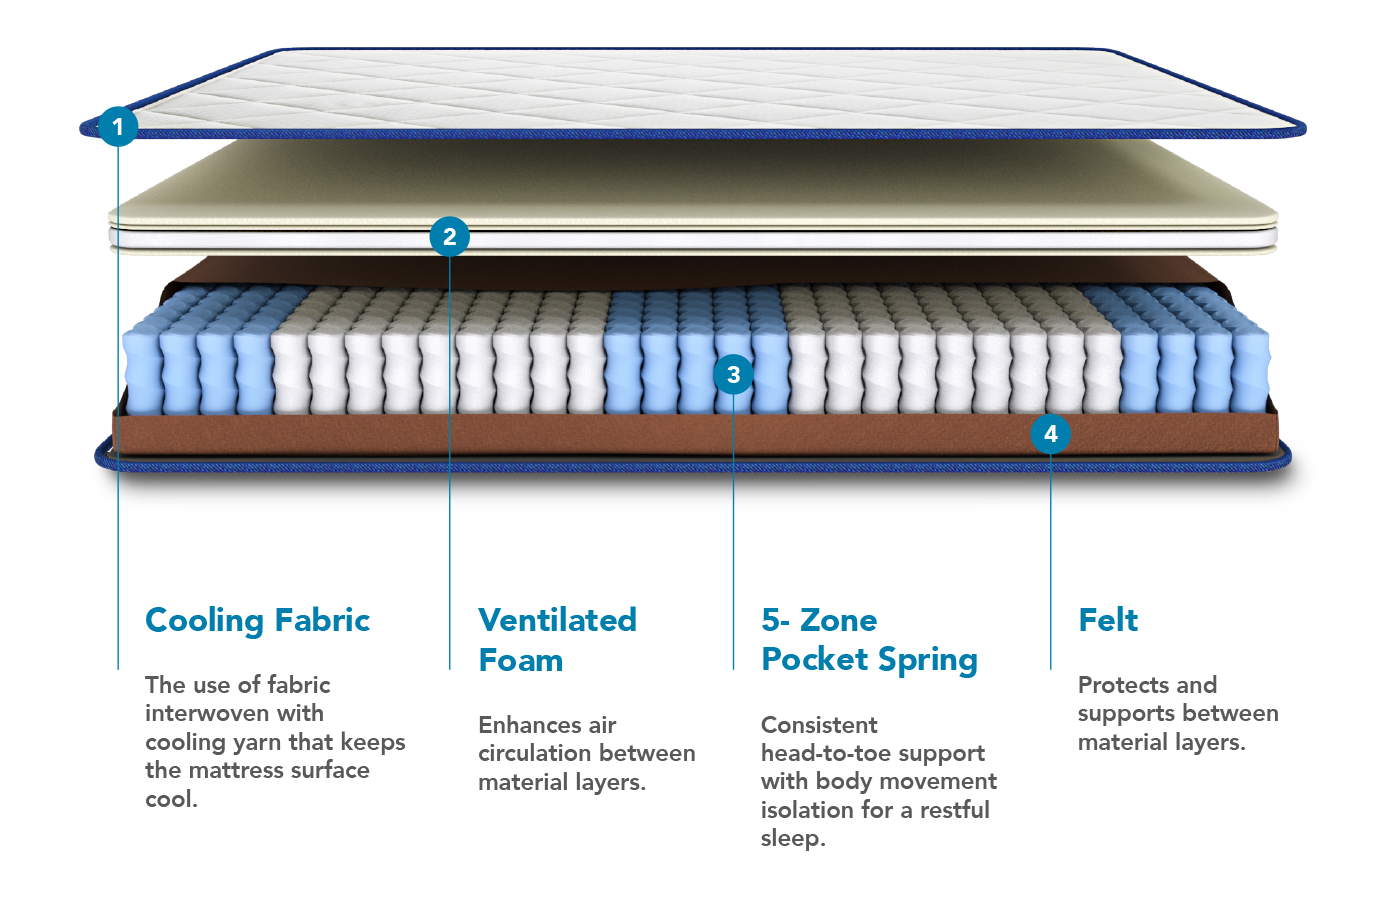 An Image Of Layers For The Coway Prime Lite Series Mattress With Descriptions - Coway Prime Lite Series